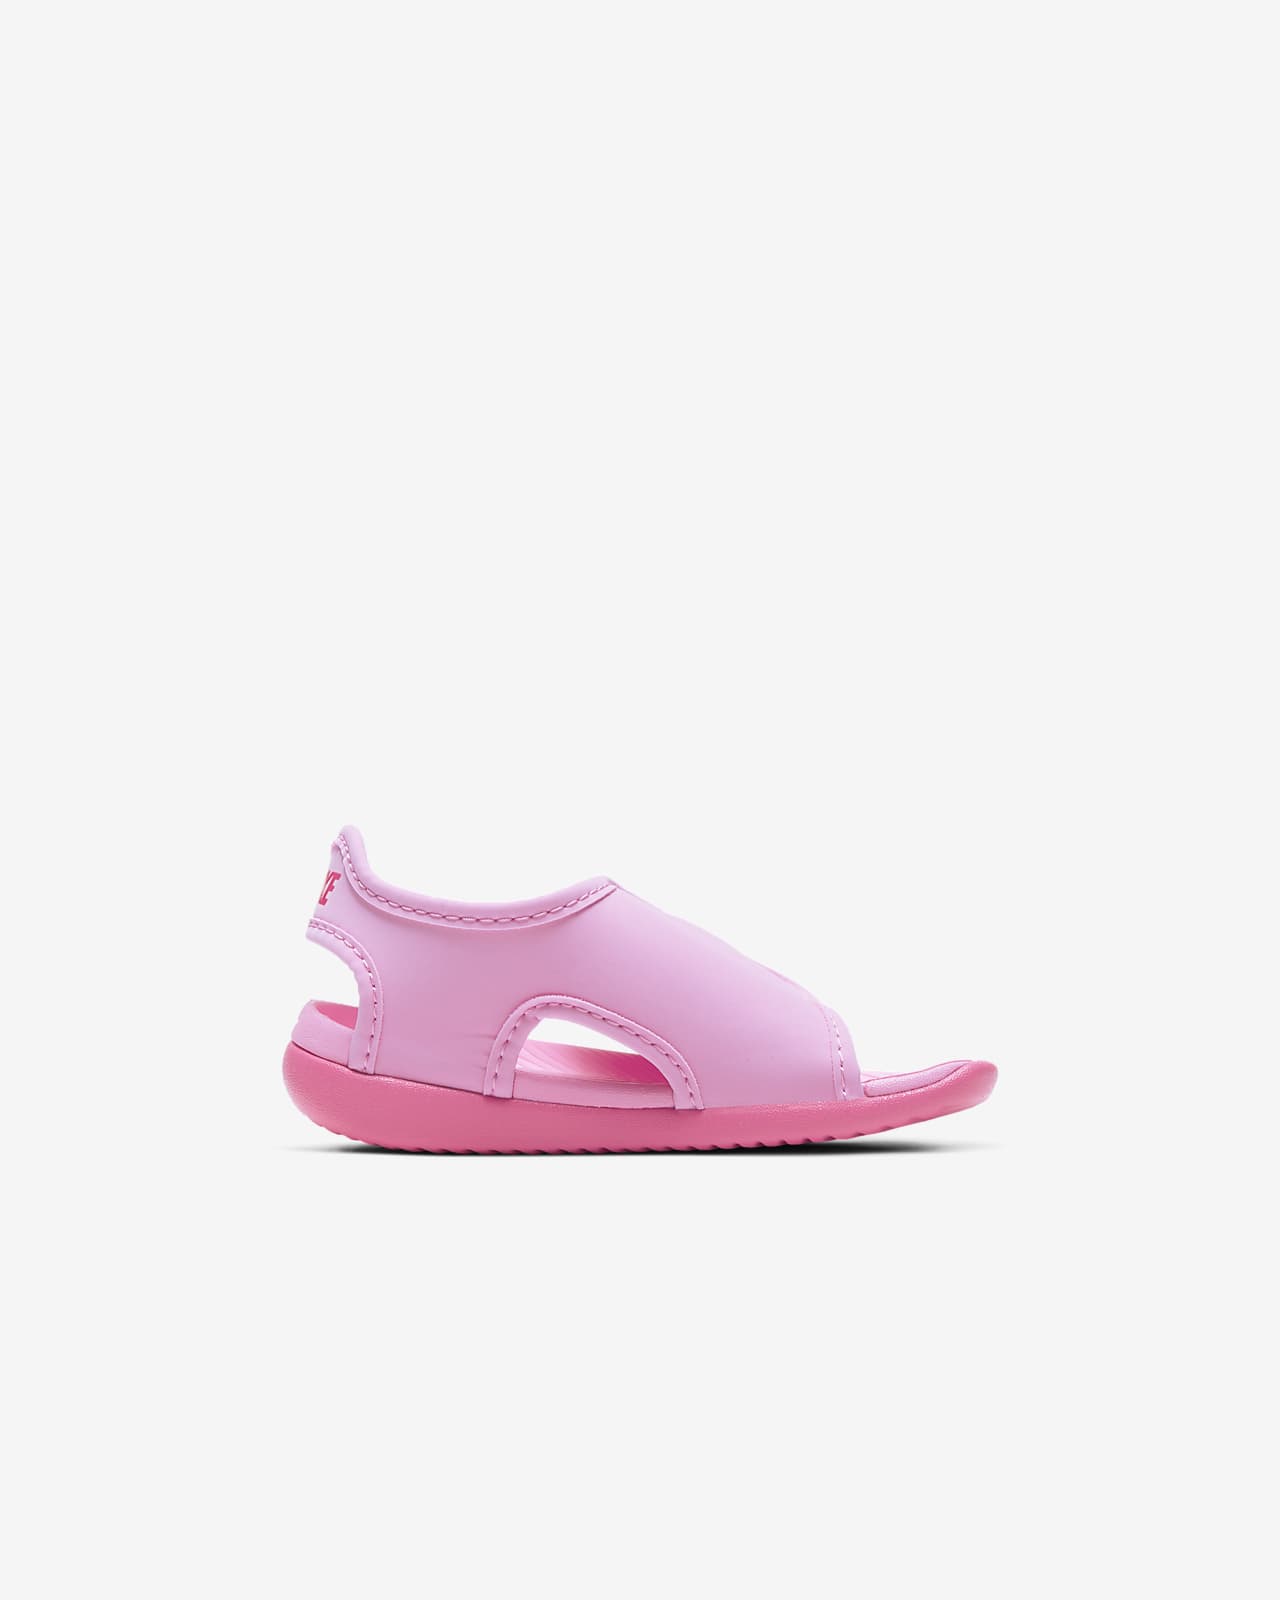 nike baby sandals pink